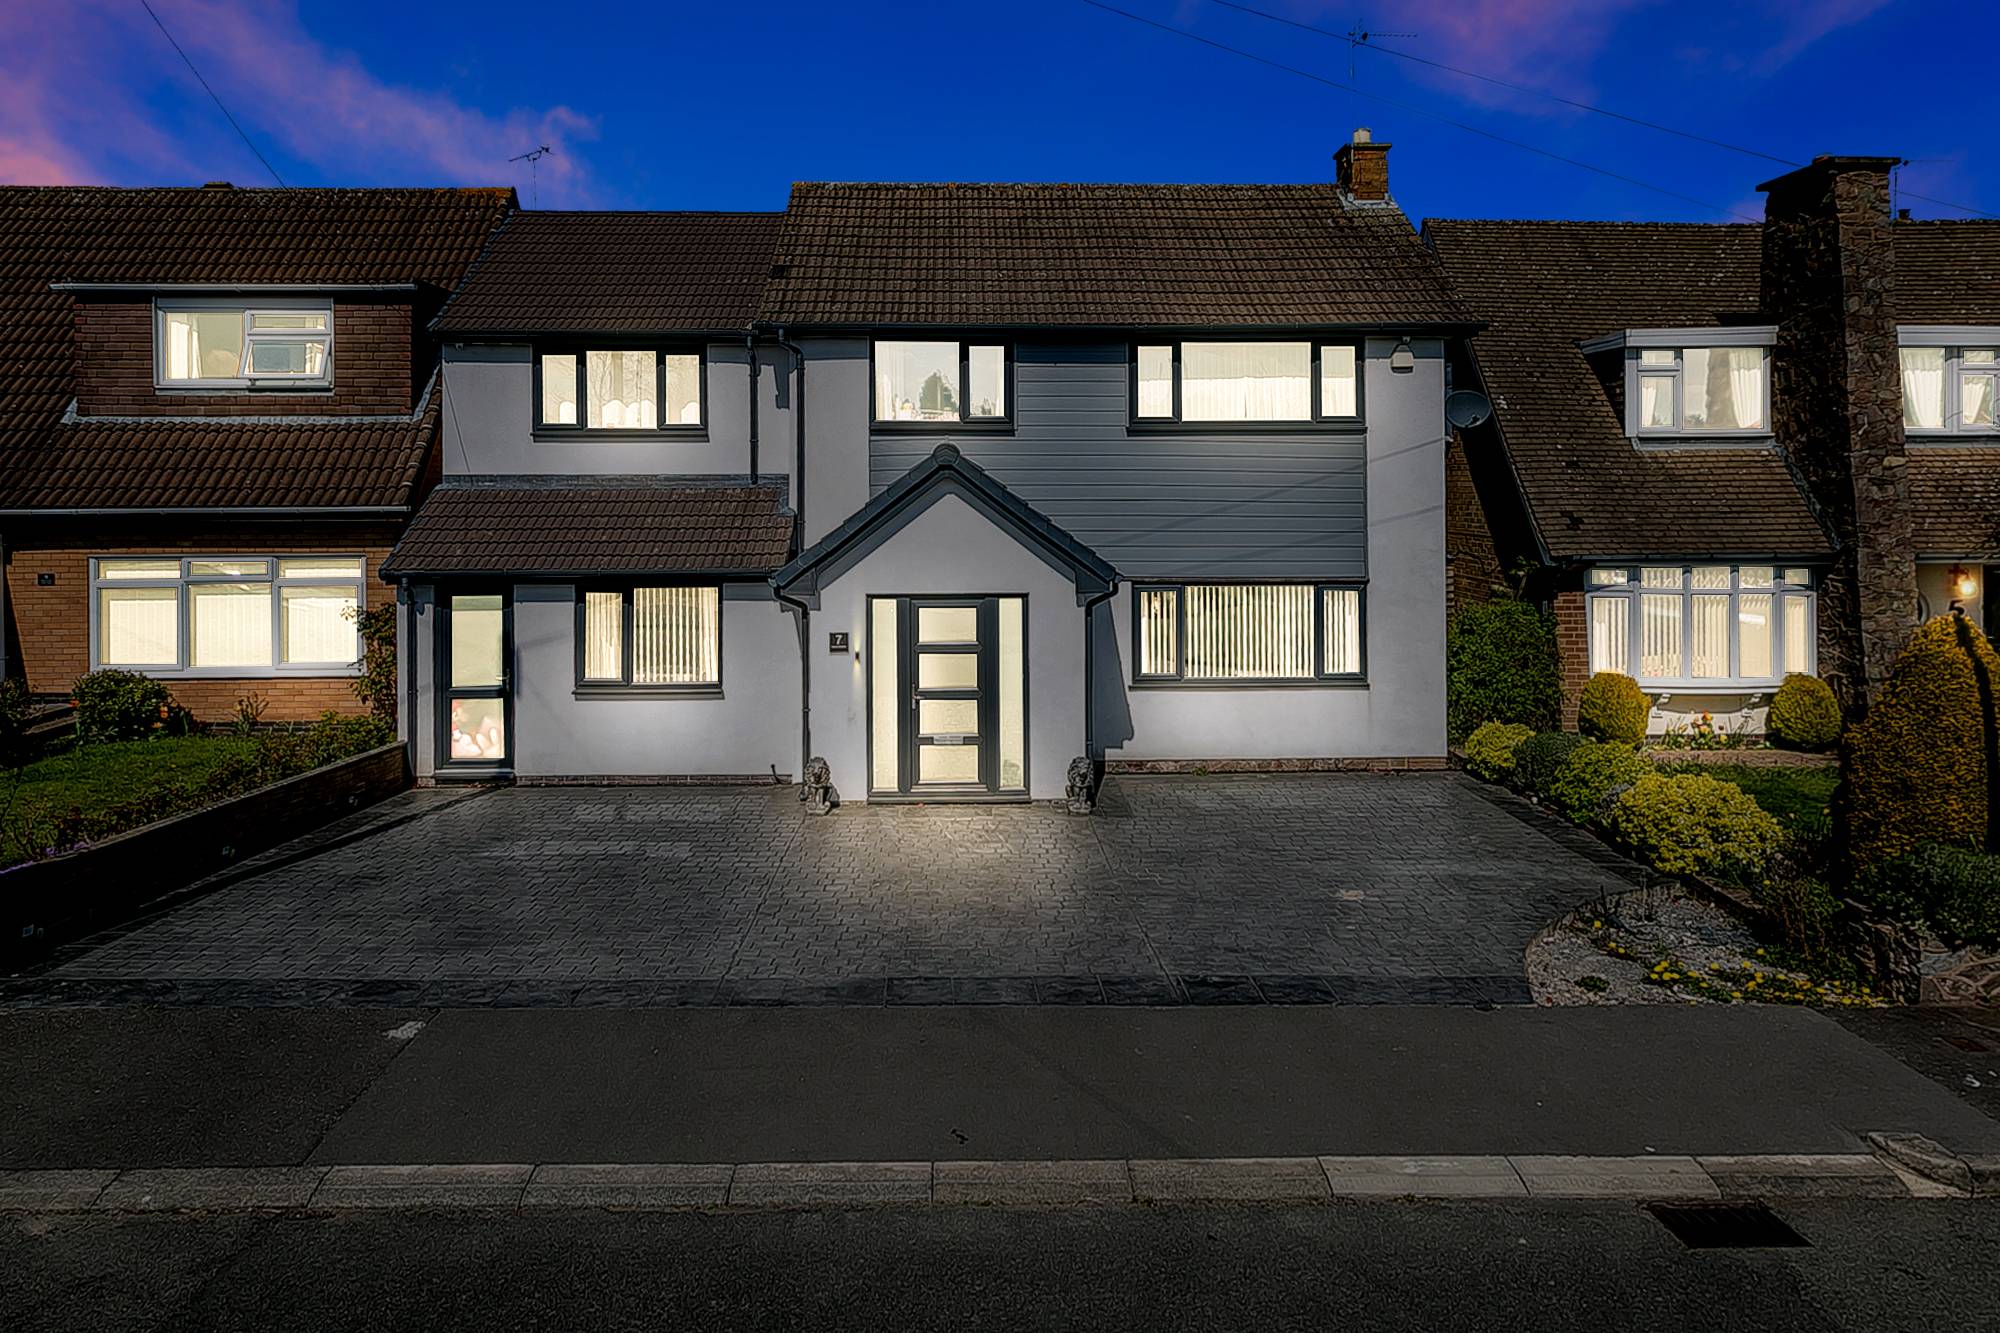 This remarkable modernised, 5 bedroom detached home with 4.5 bathrooms offers masses of bright and spacious high-end living - ideal for growing families.